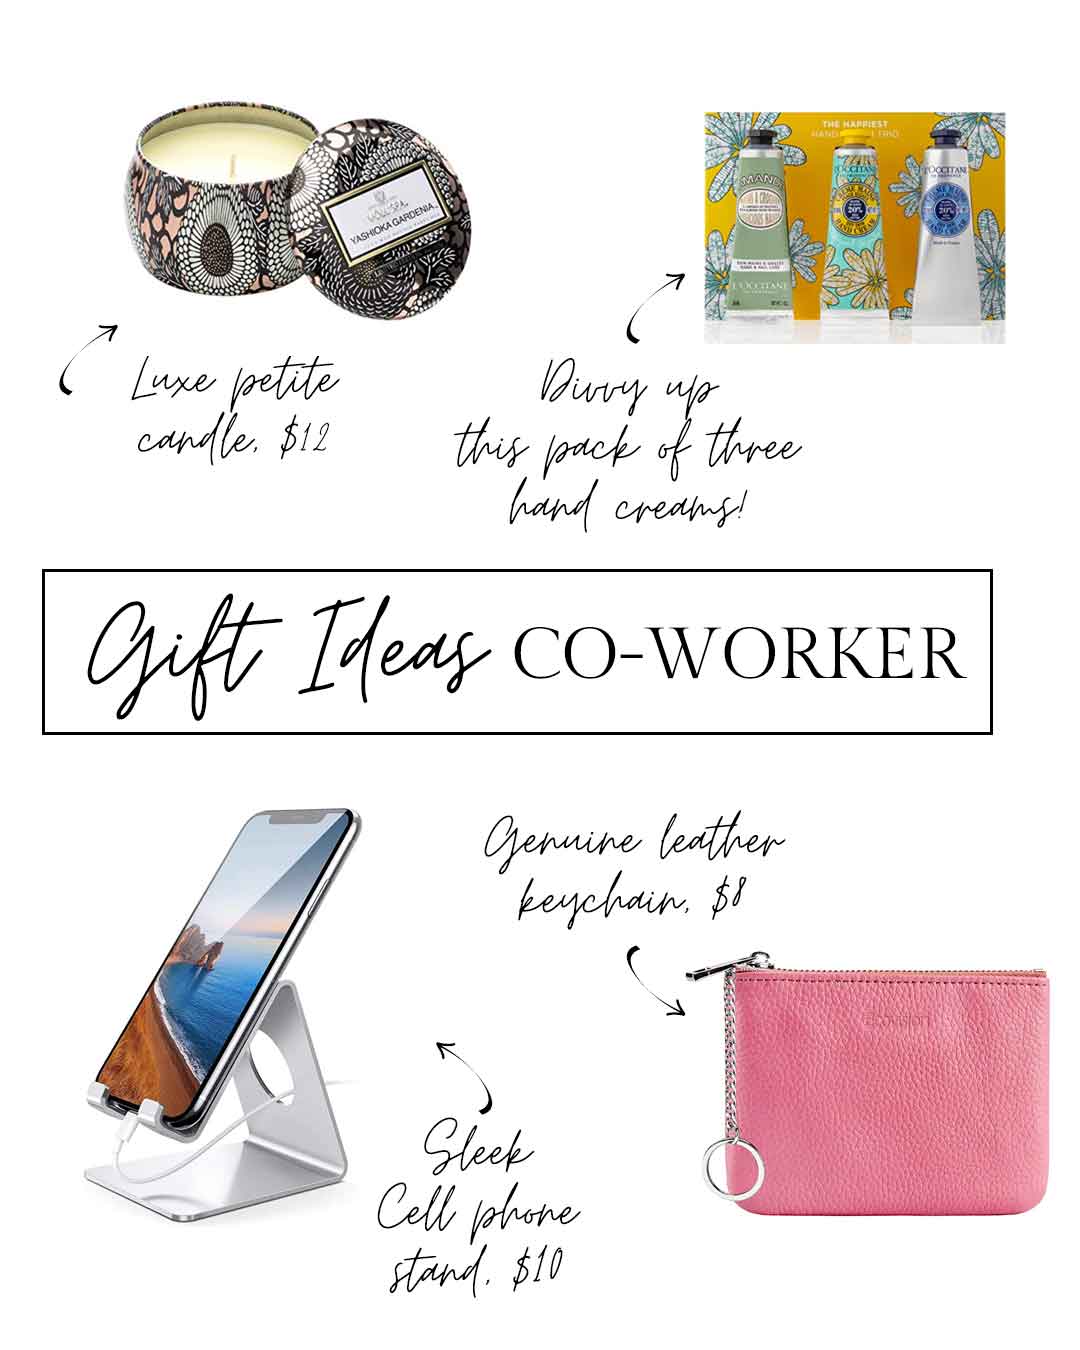 Gifts for coworkers under $10